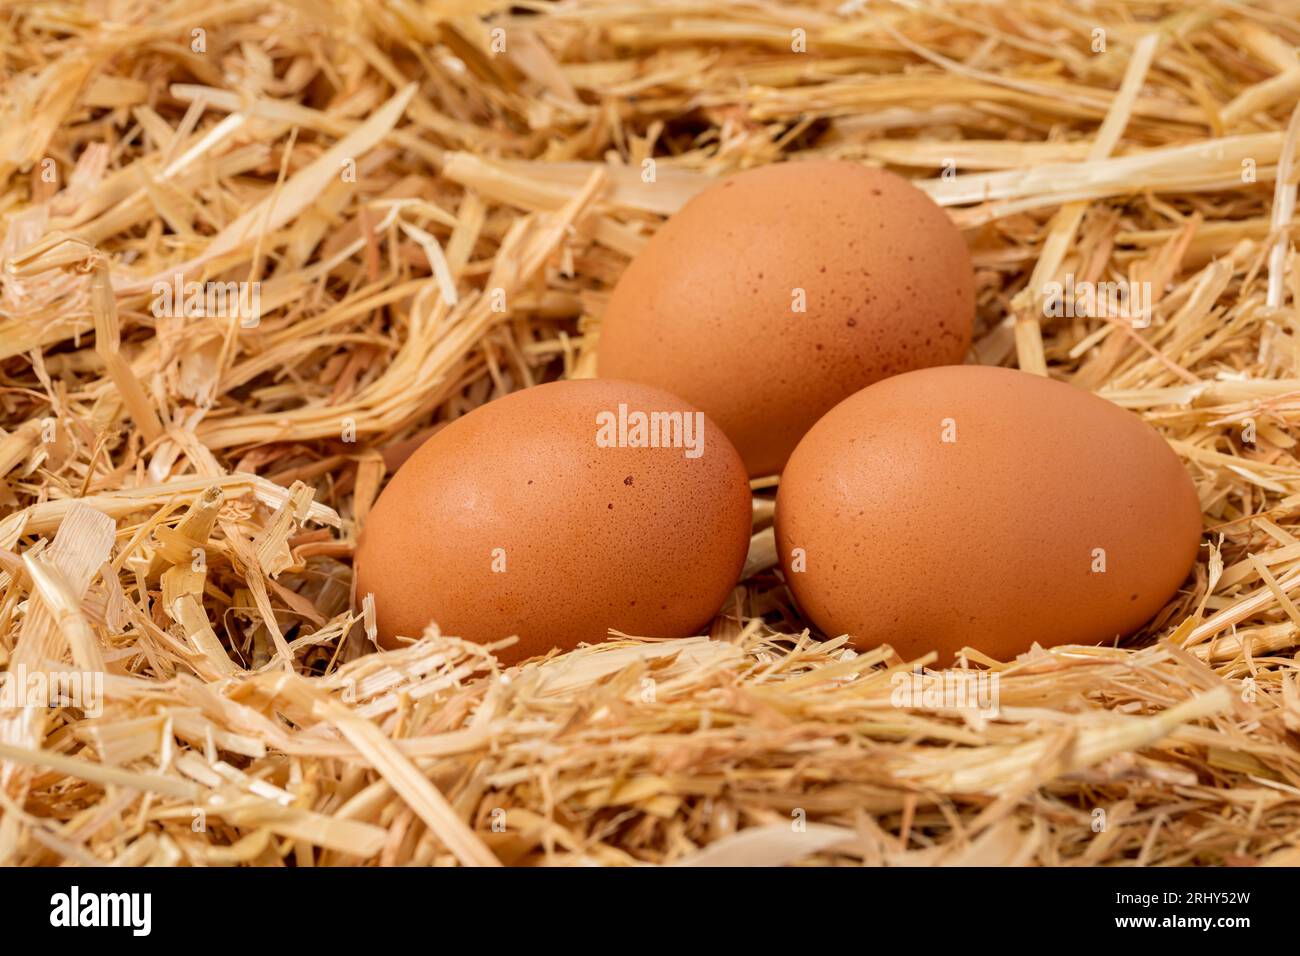 Fresh brown chicken eggs in nest of straw. Organic, cage-free and free-range poultry farming concept. Stock Photo